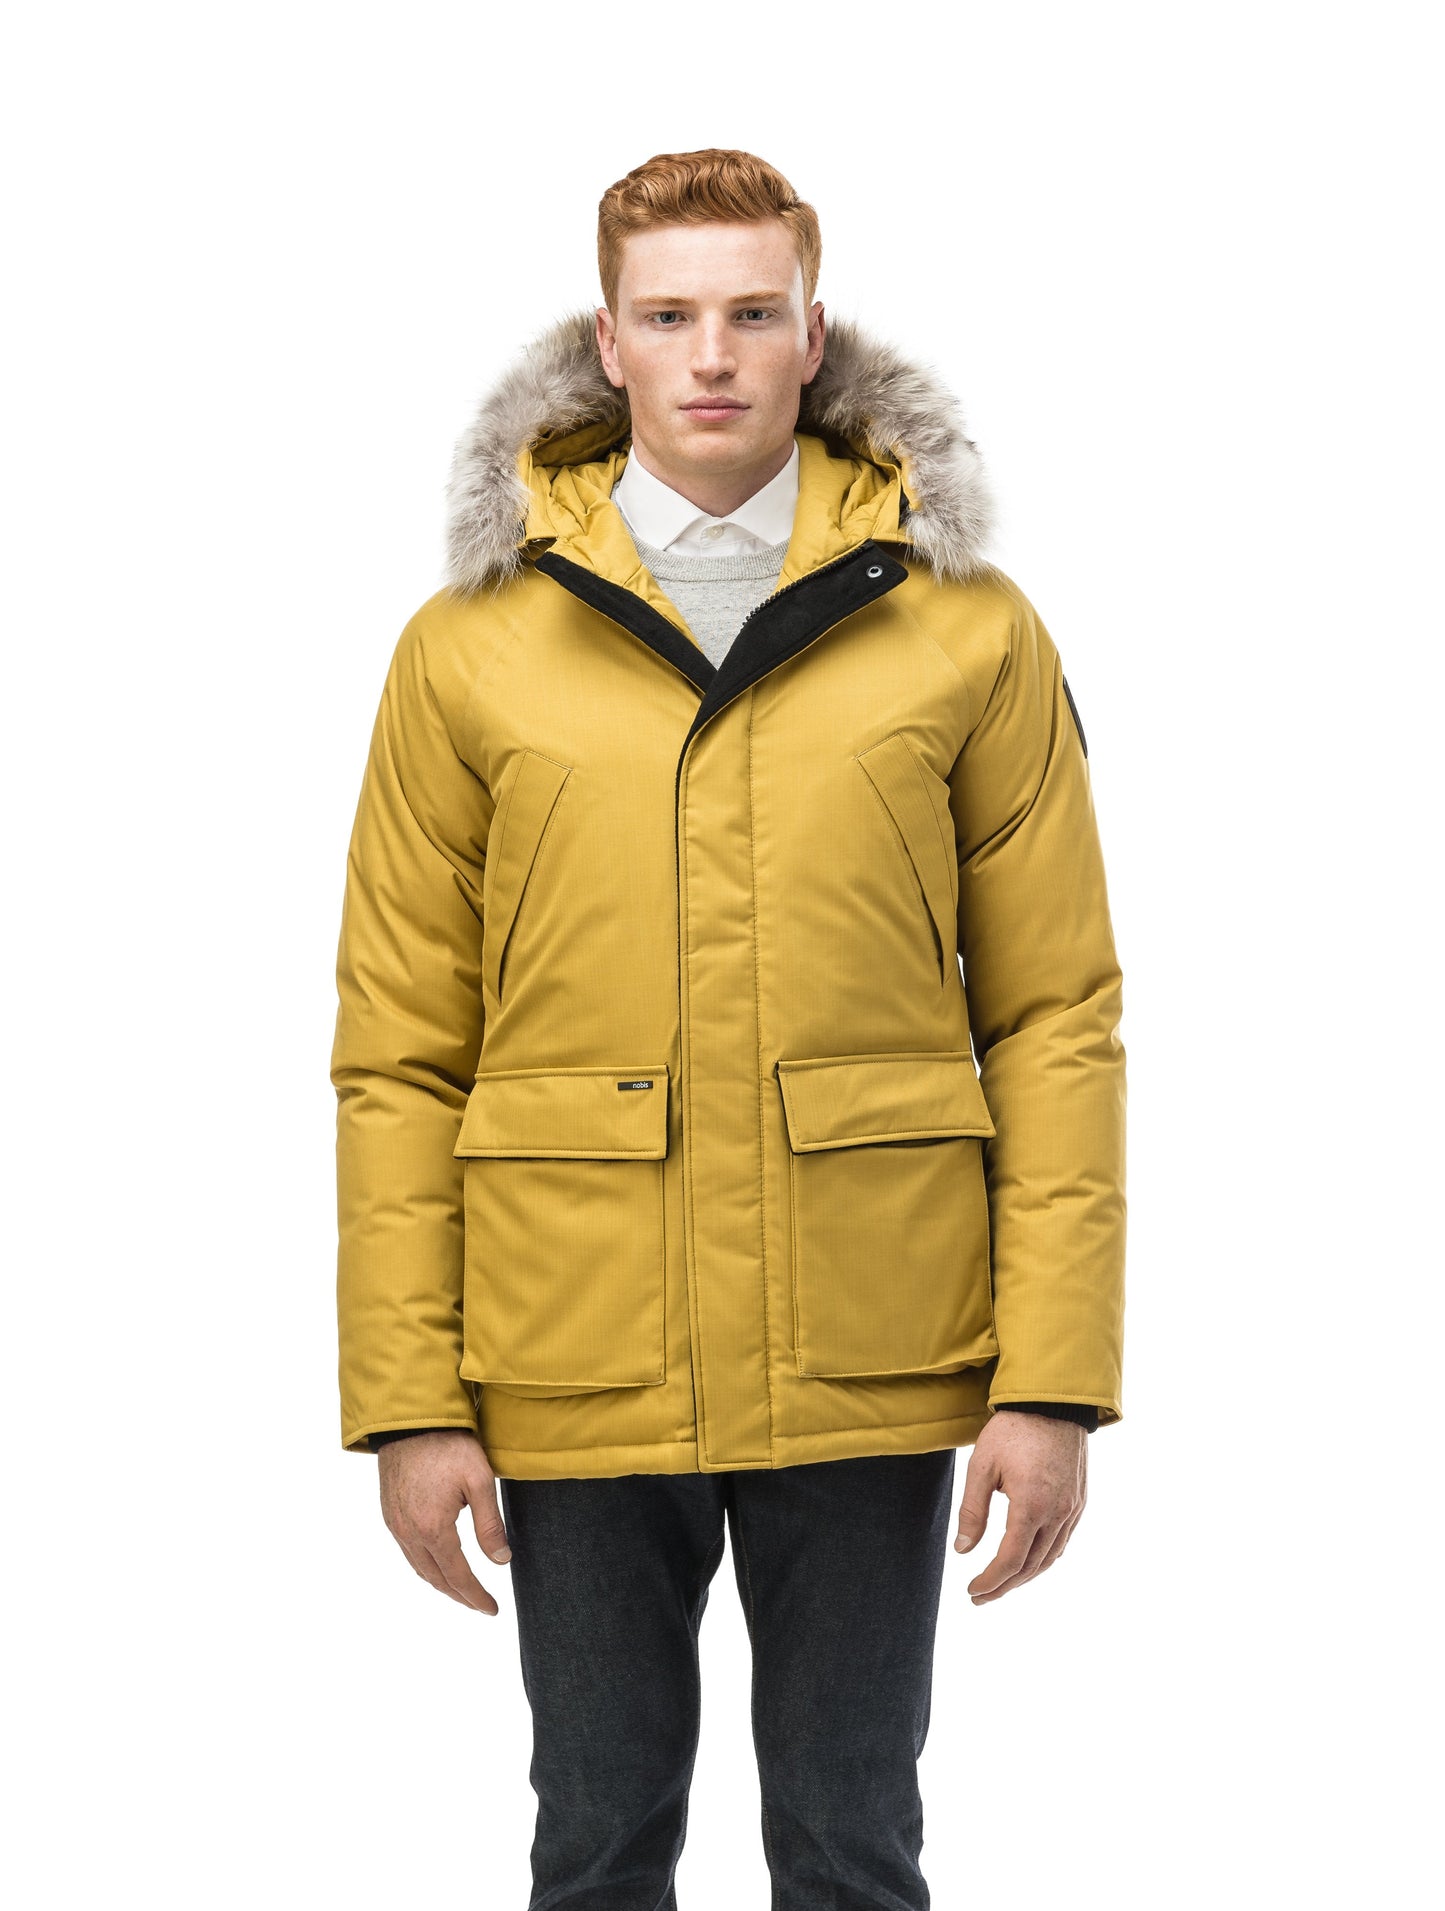 Men's waist length down filled jacket with two front pockets with magnetic closure and a removable fur trim on the hood in CH Yellow